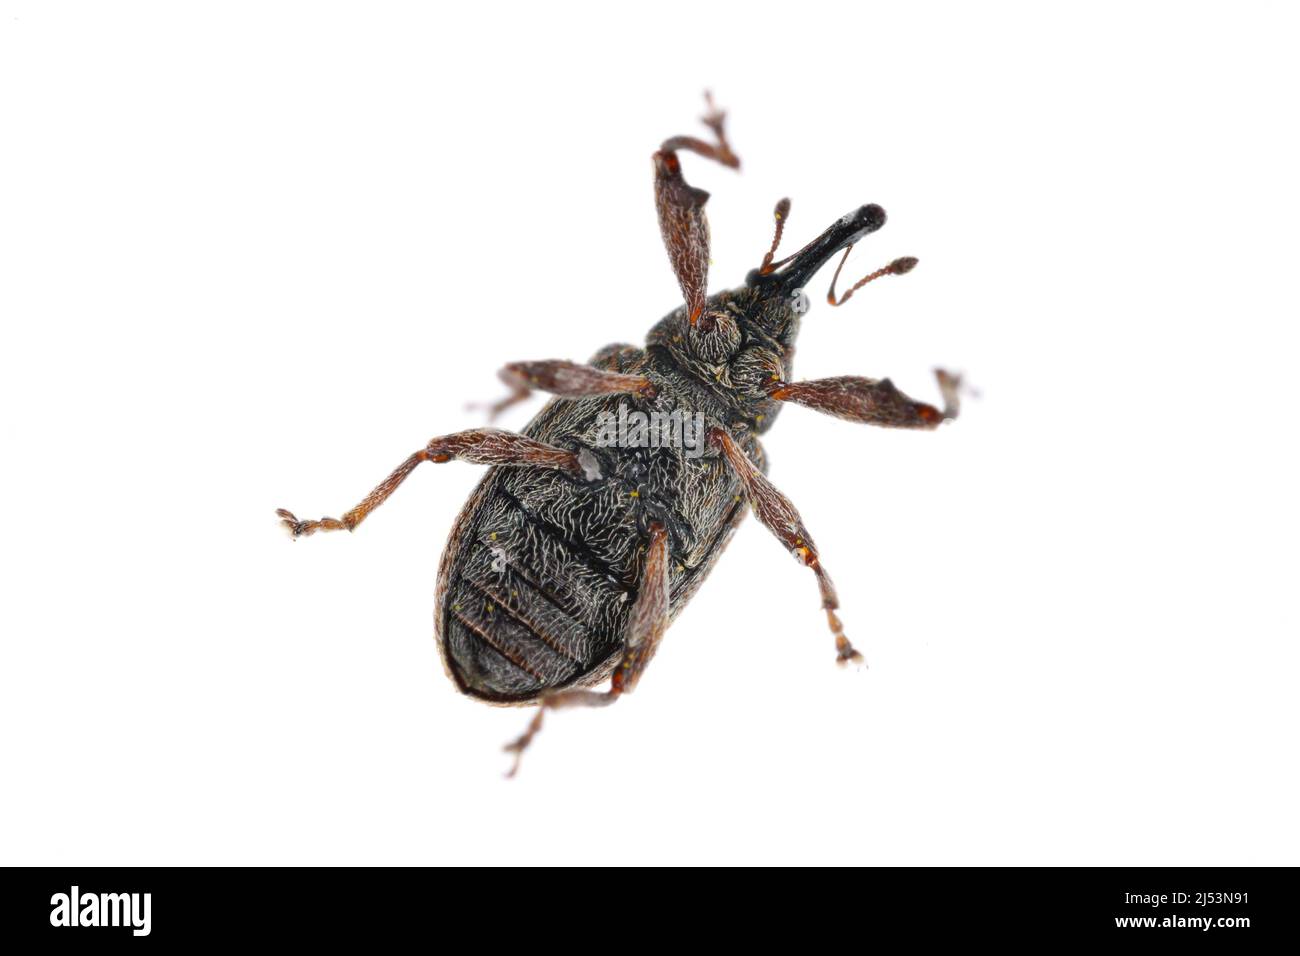 Apple blossom weevil (Anthonomus pomorum). One of the most important pests of apple trees in orchards and gardens. Stock Photo